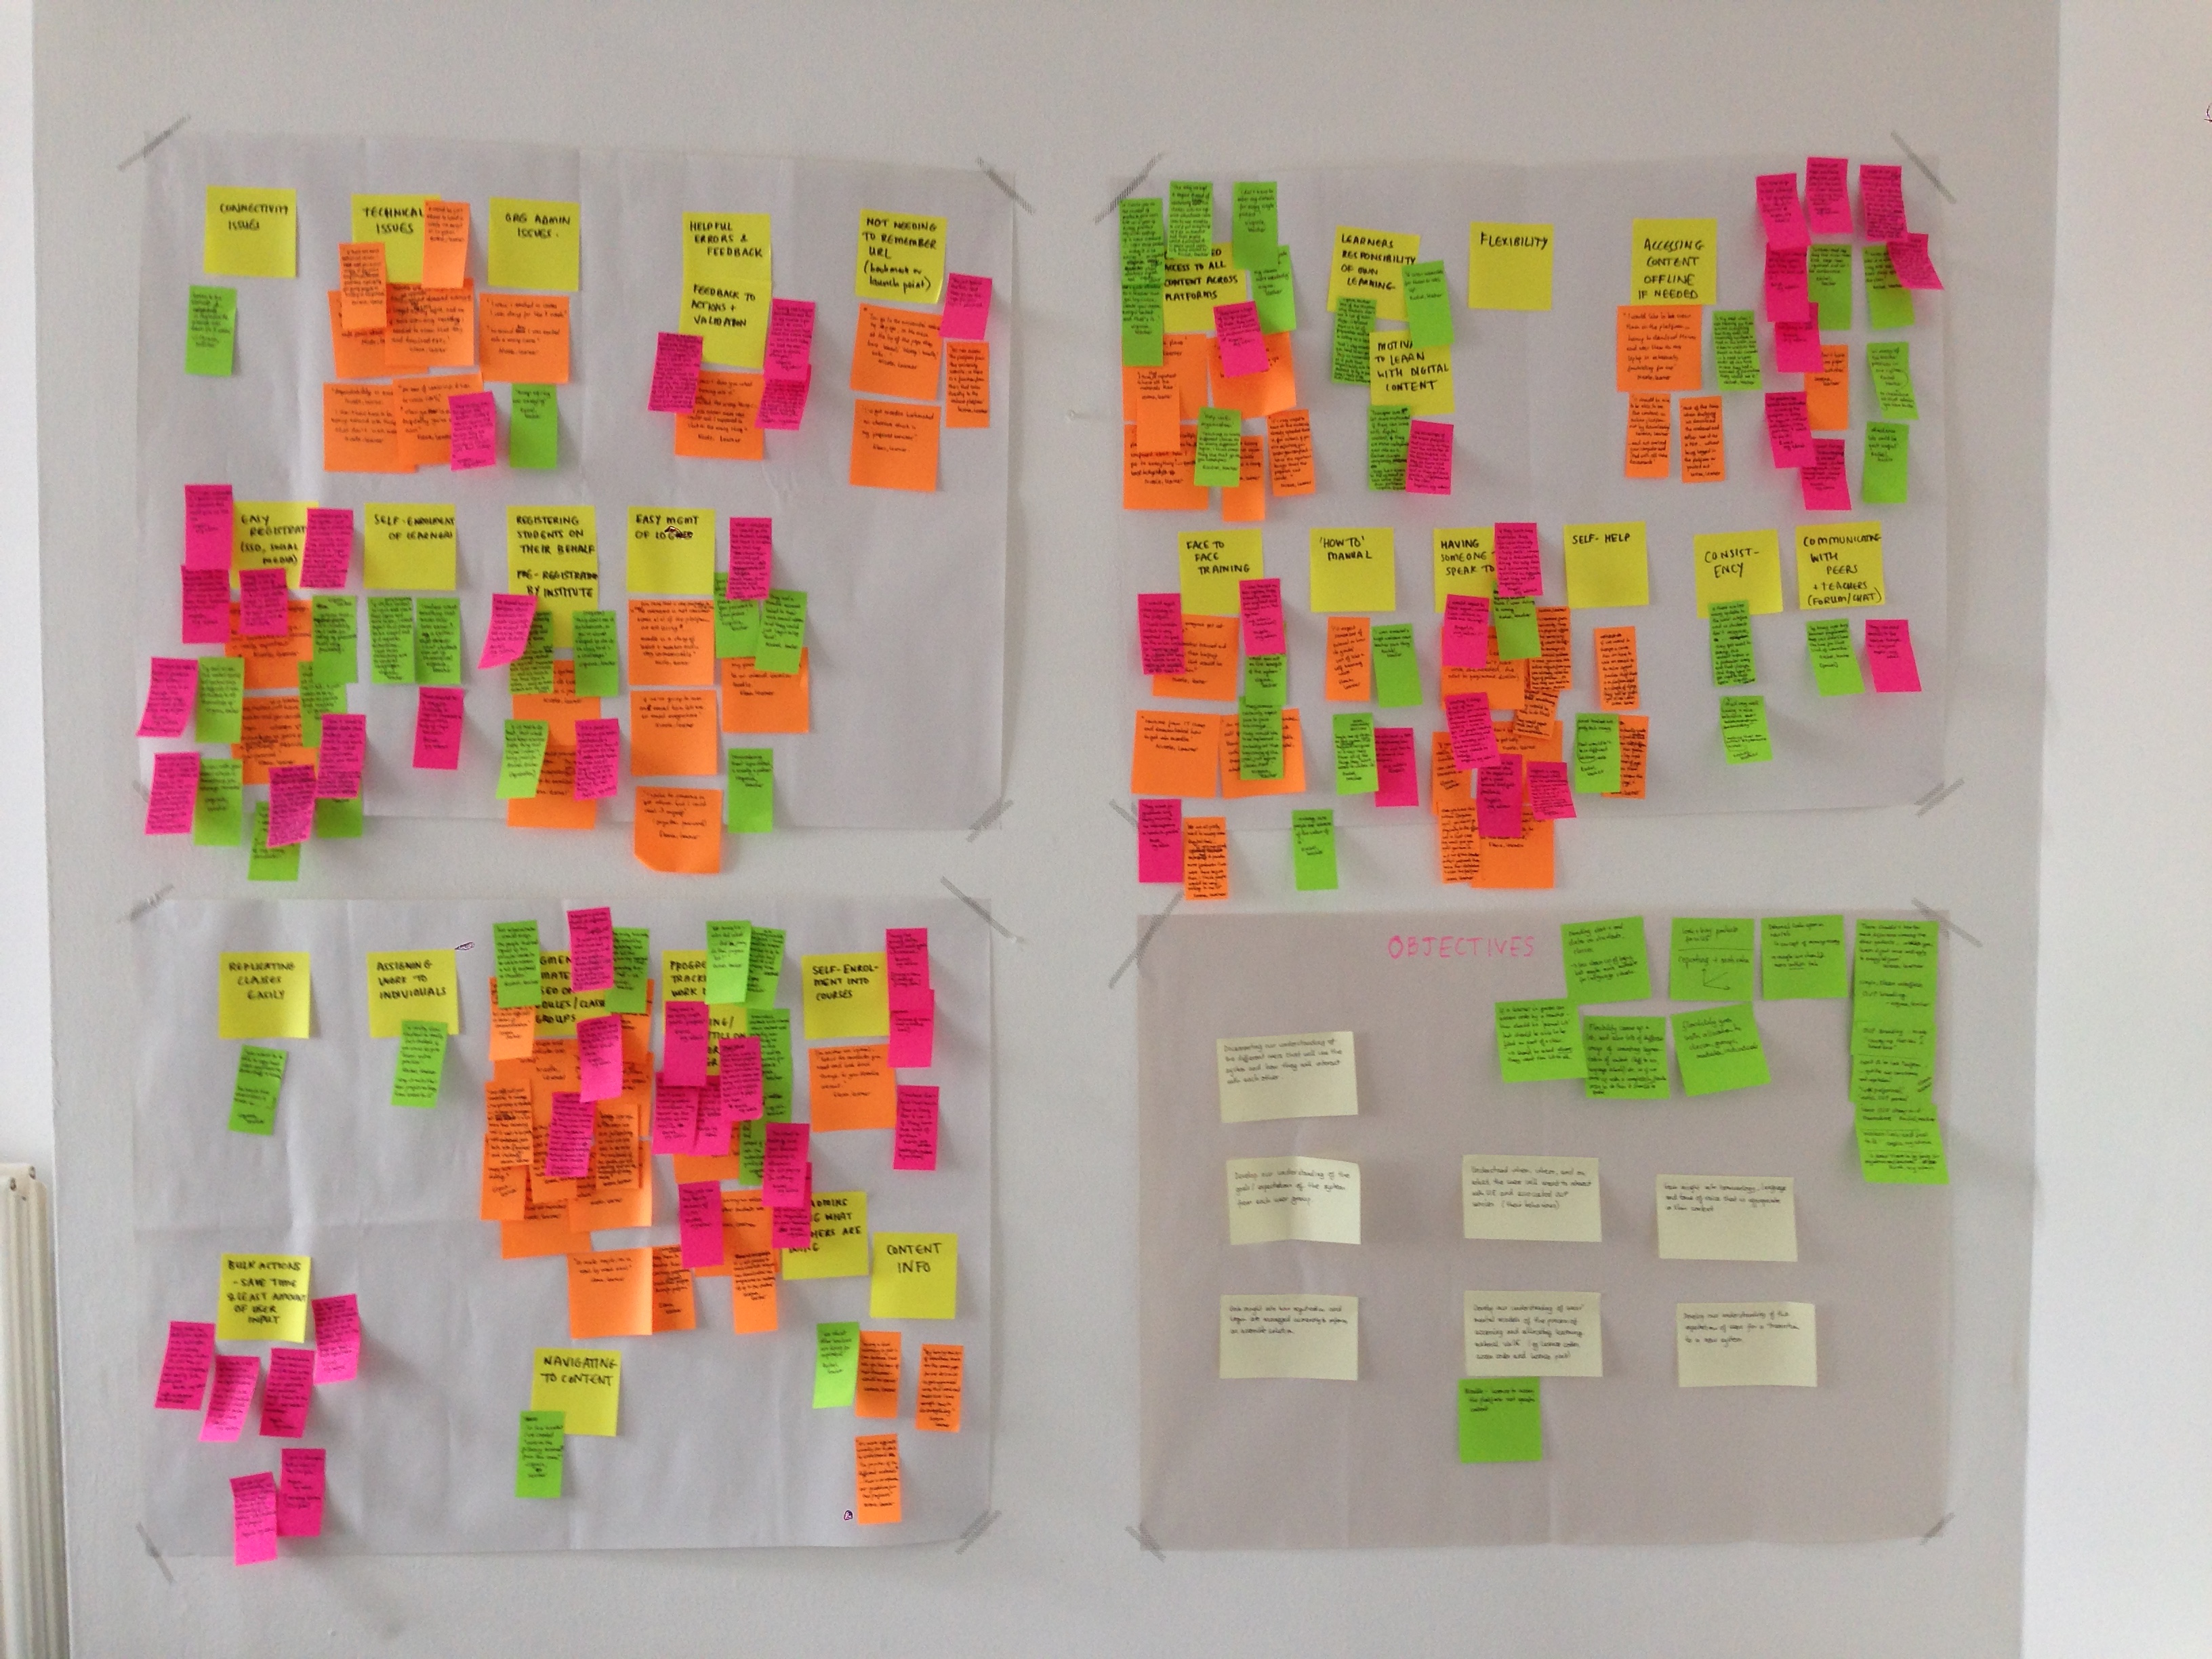 User interview analysis and synthesis with post it notes